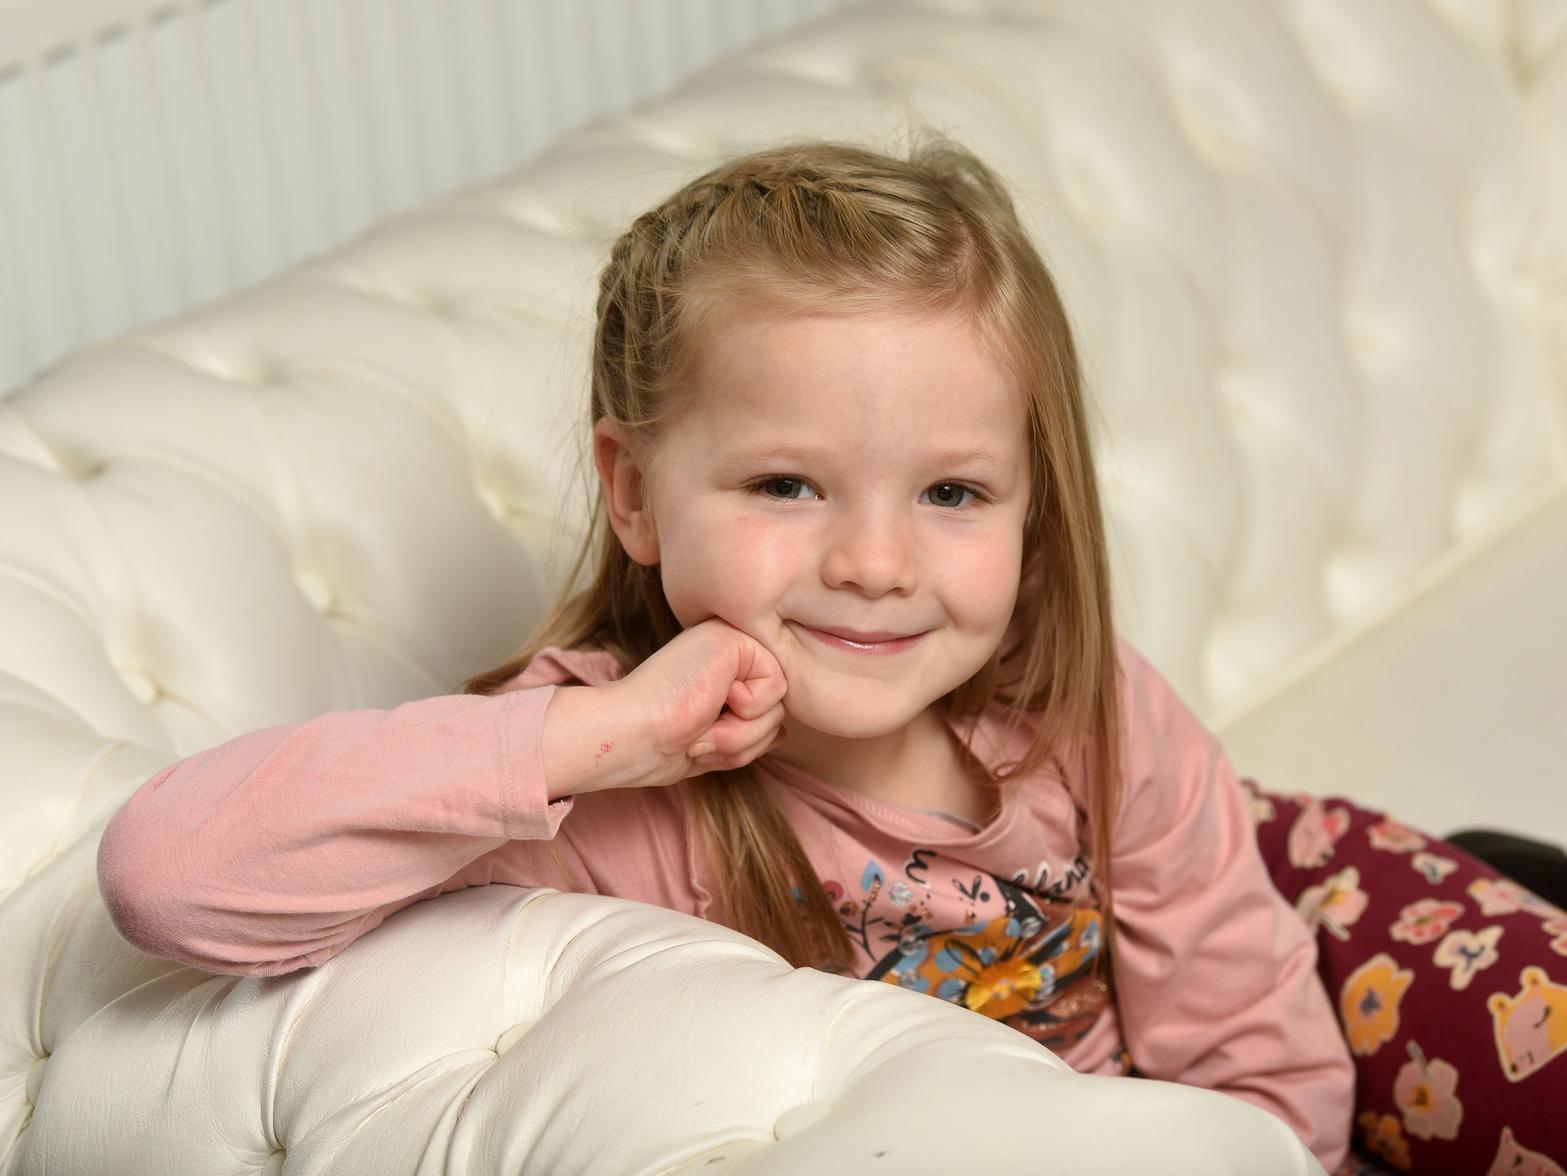 Quick-thinking Hollie Heywood, six, hit the headlines in October after saving the life a man suffering a heart attack. The youngster, from Cleveleys, saw the man in difficulty and alerted others who were able to help him just in time.